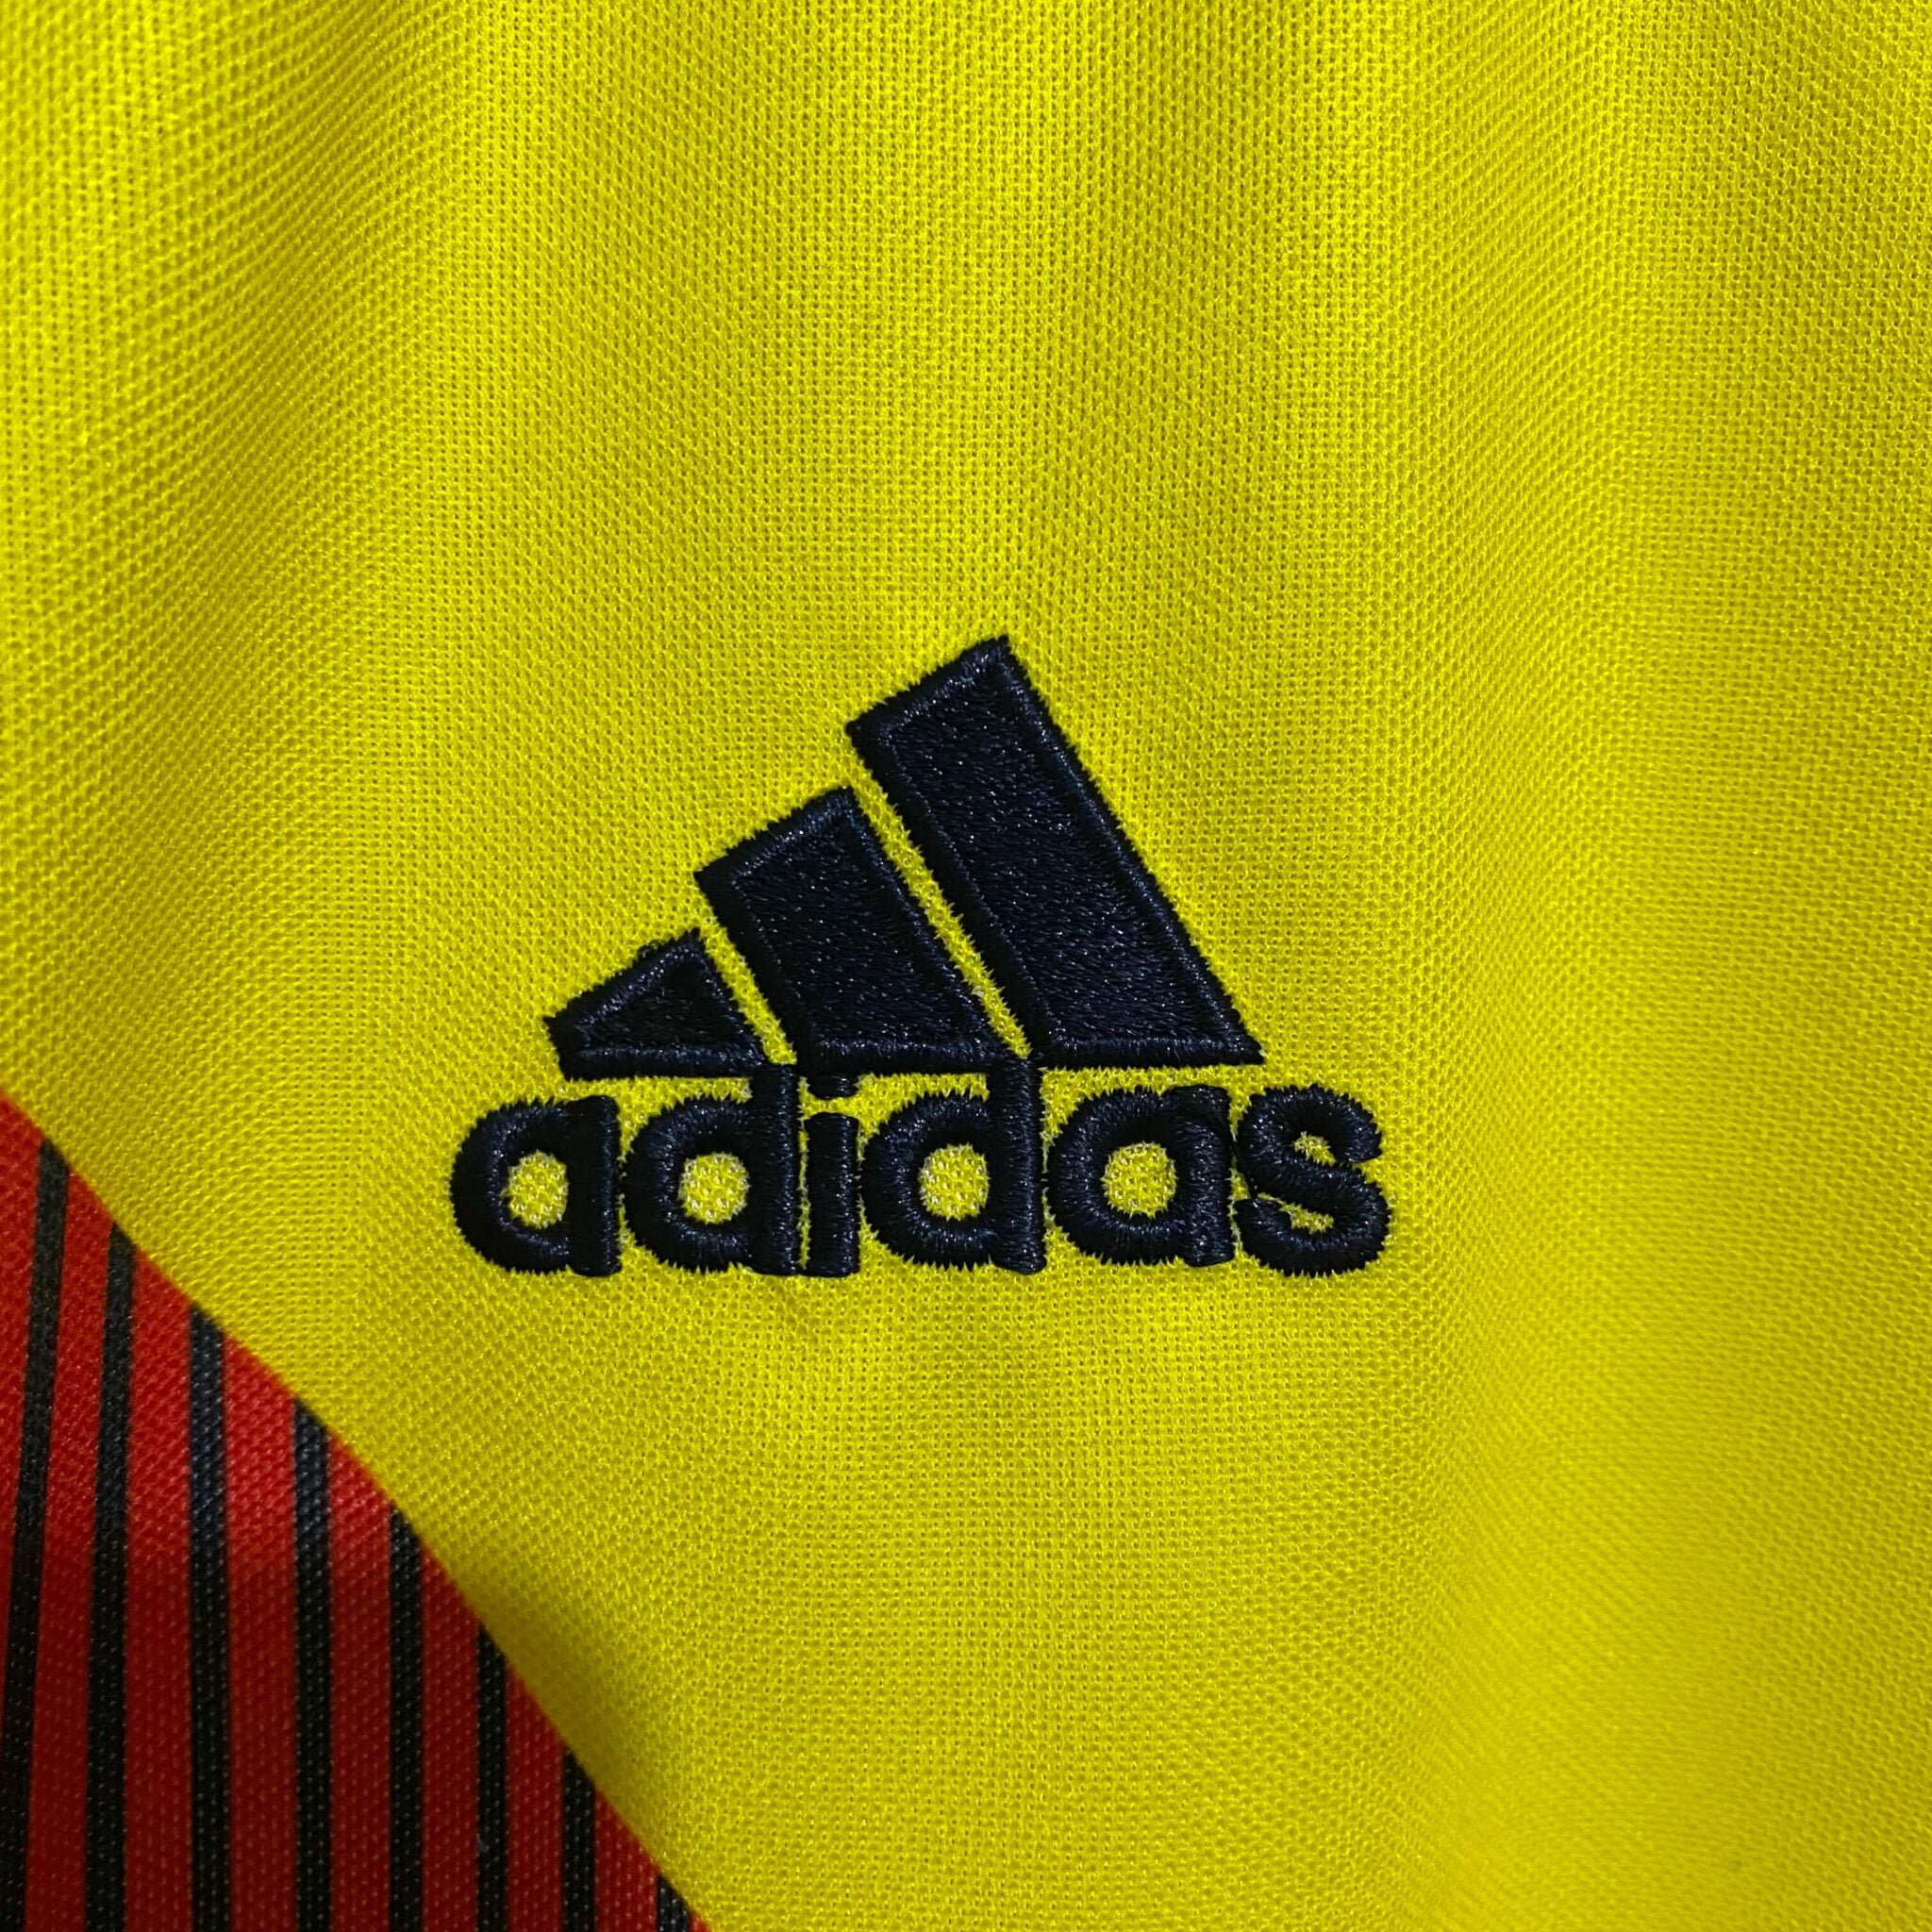 Colombia 2018 Home Kit – The Football Heritage